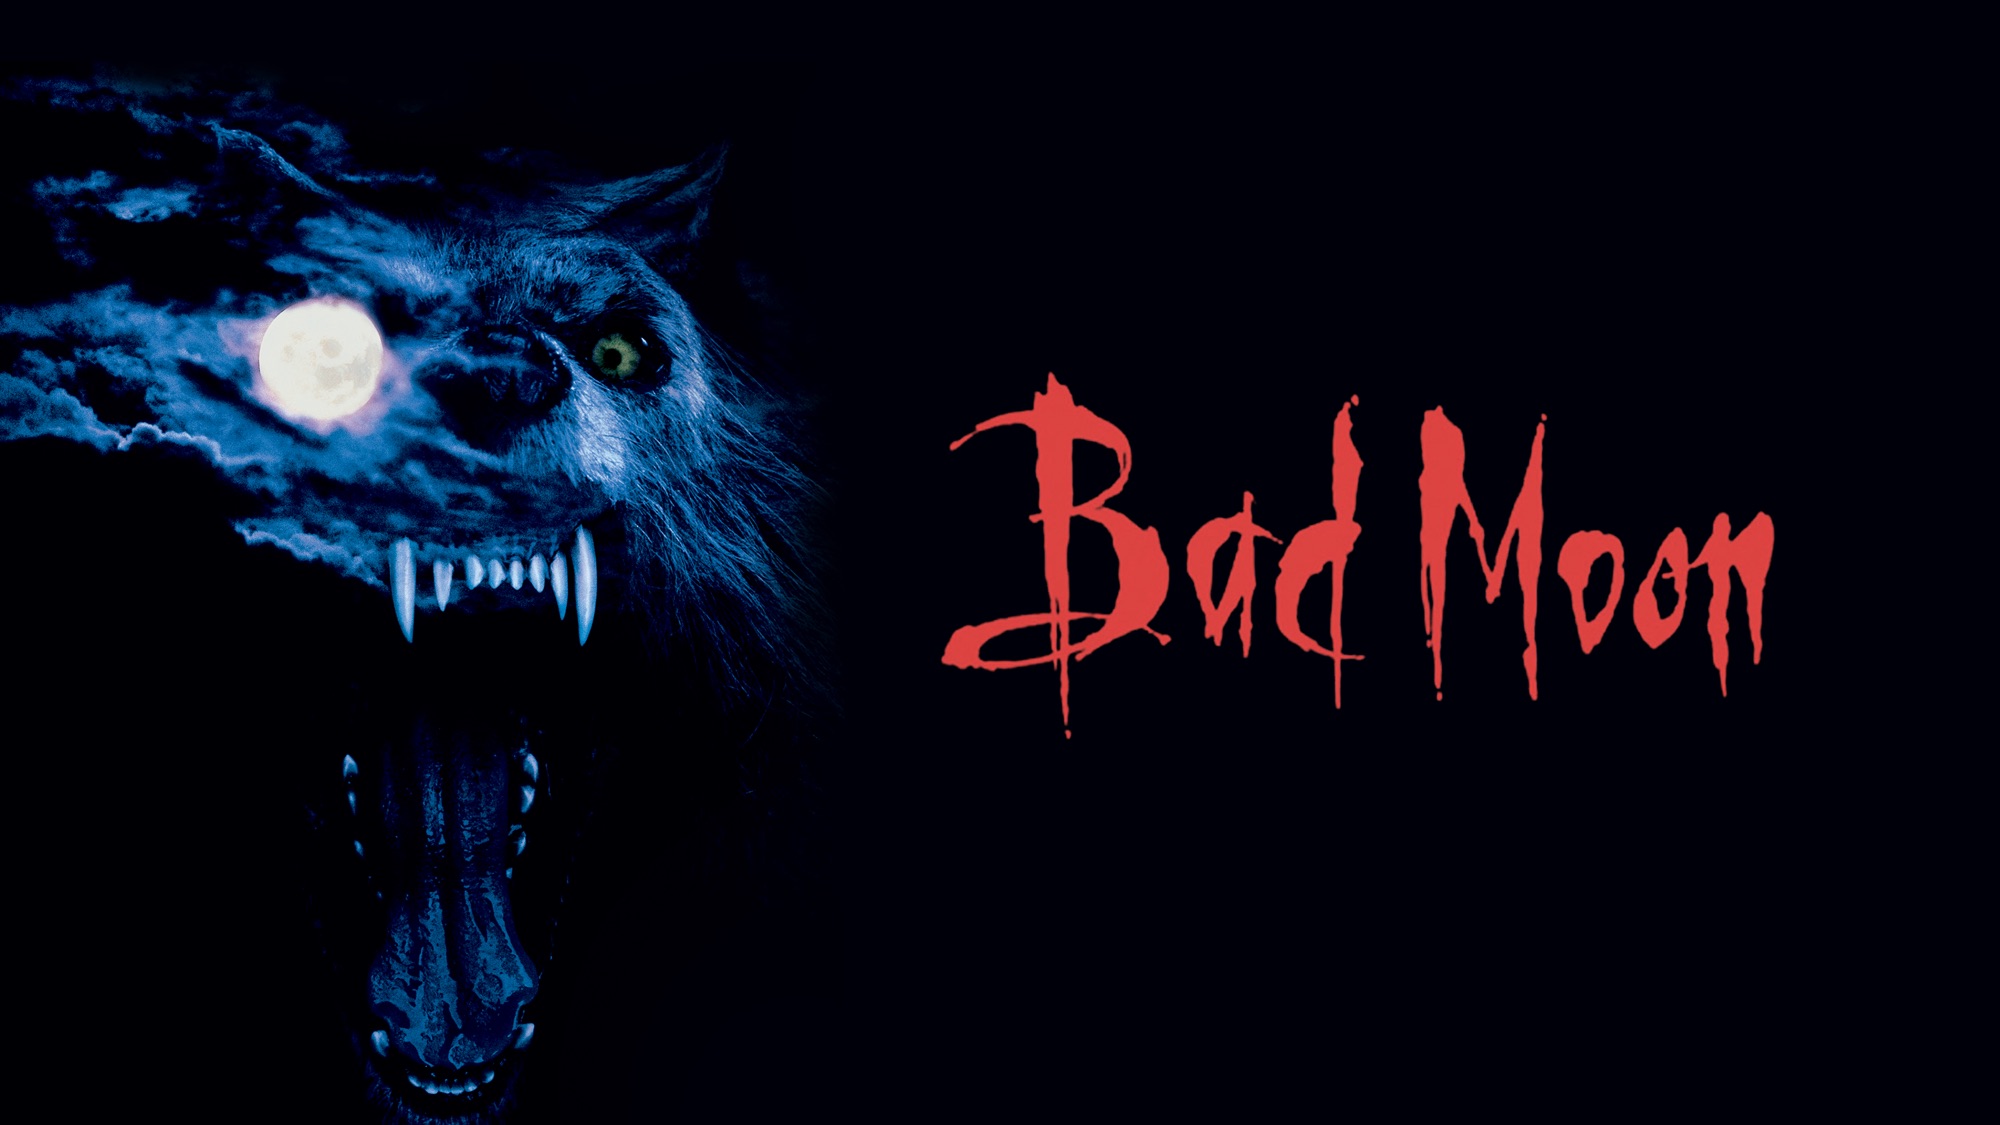 bad moon movie review